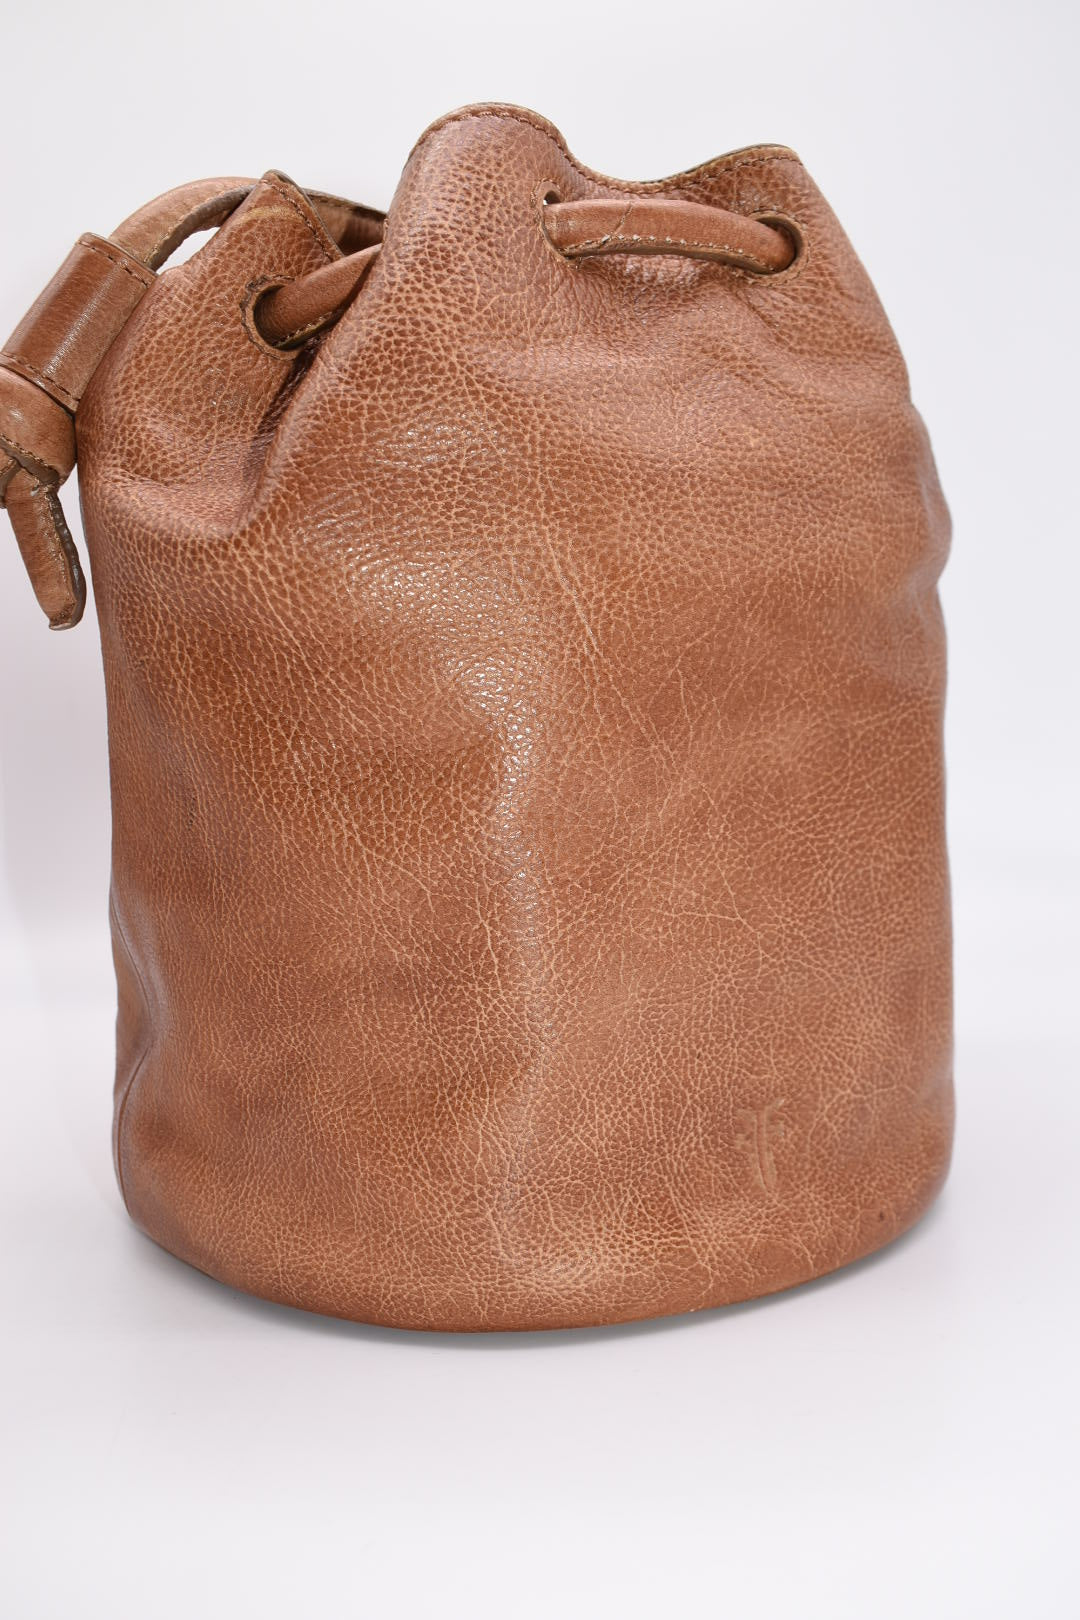 Frye Beige Nora Knotted Leather Bucket Bag